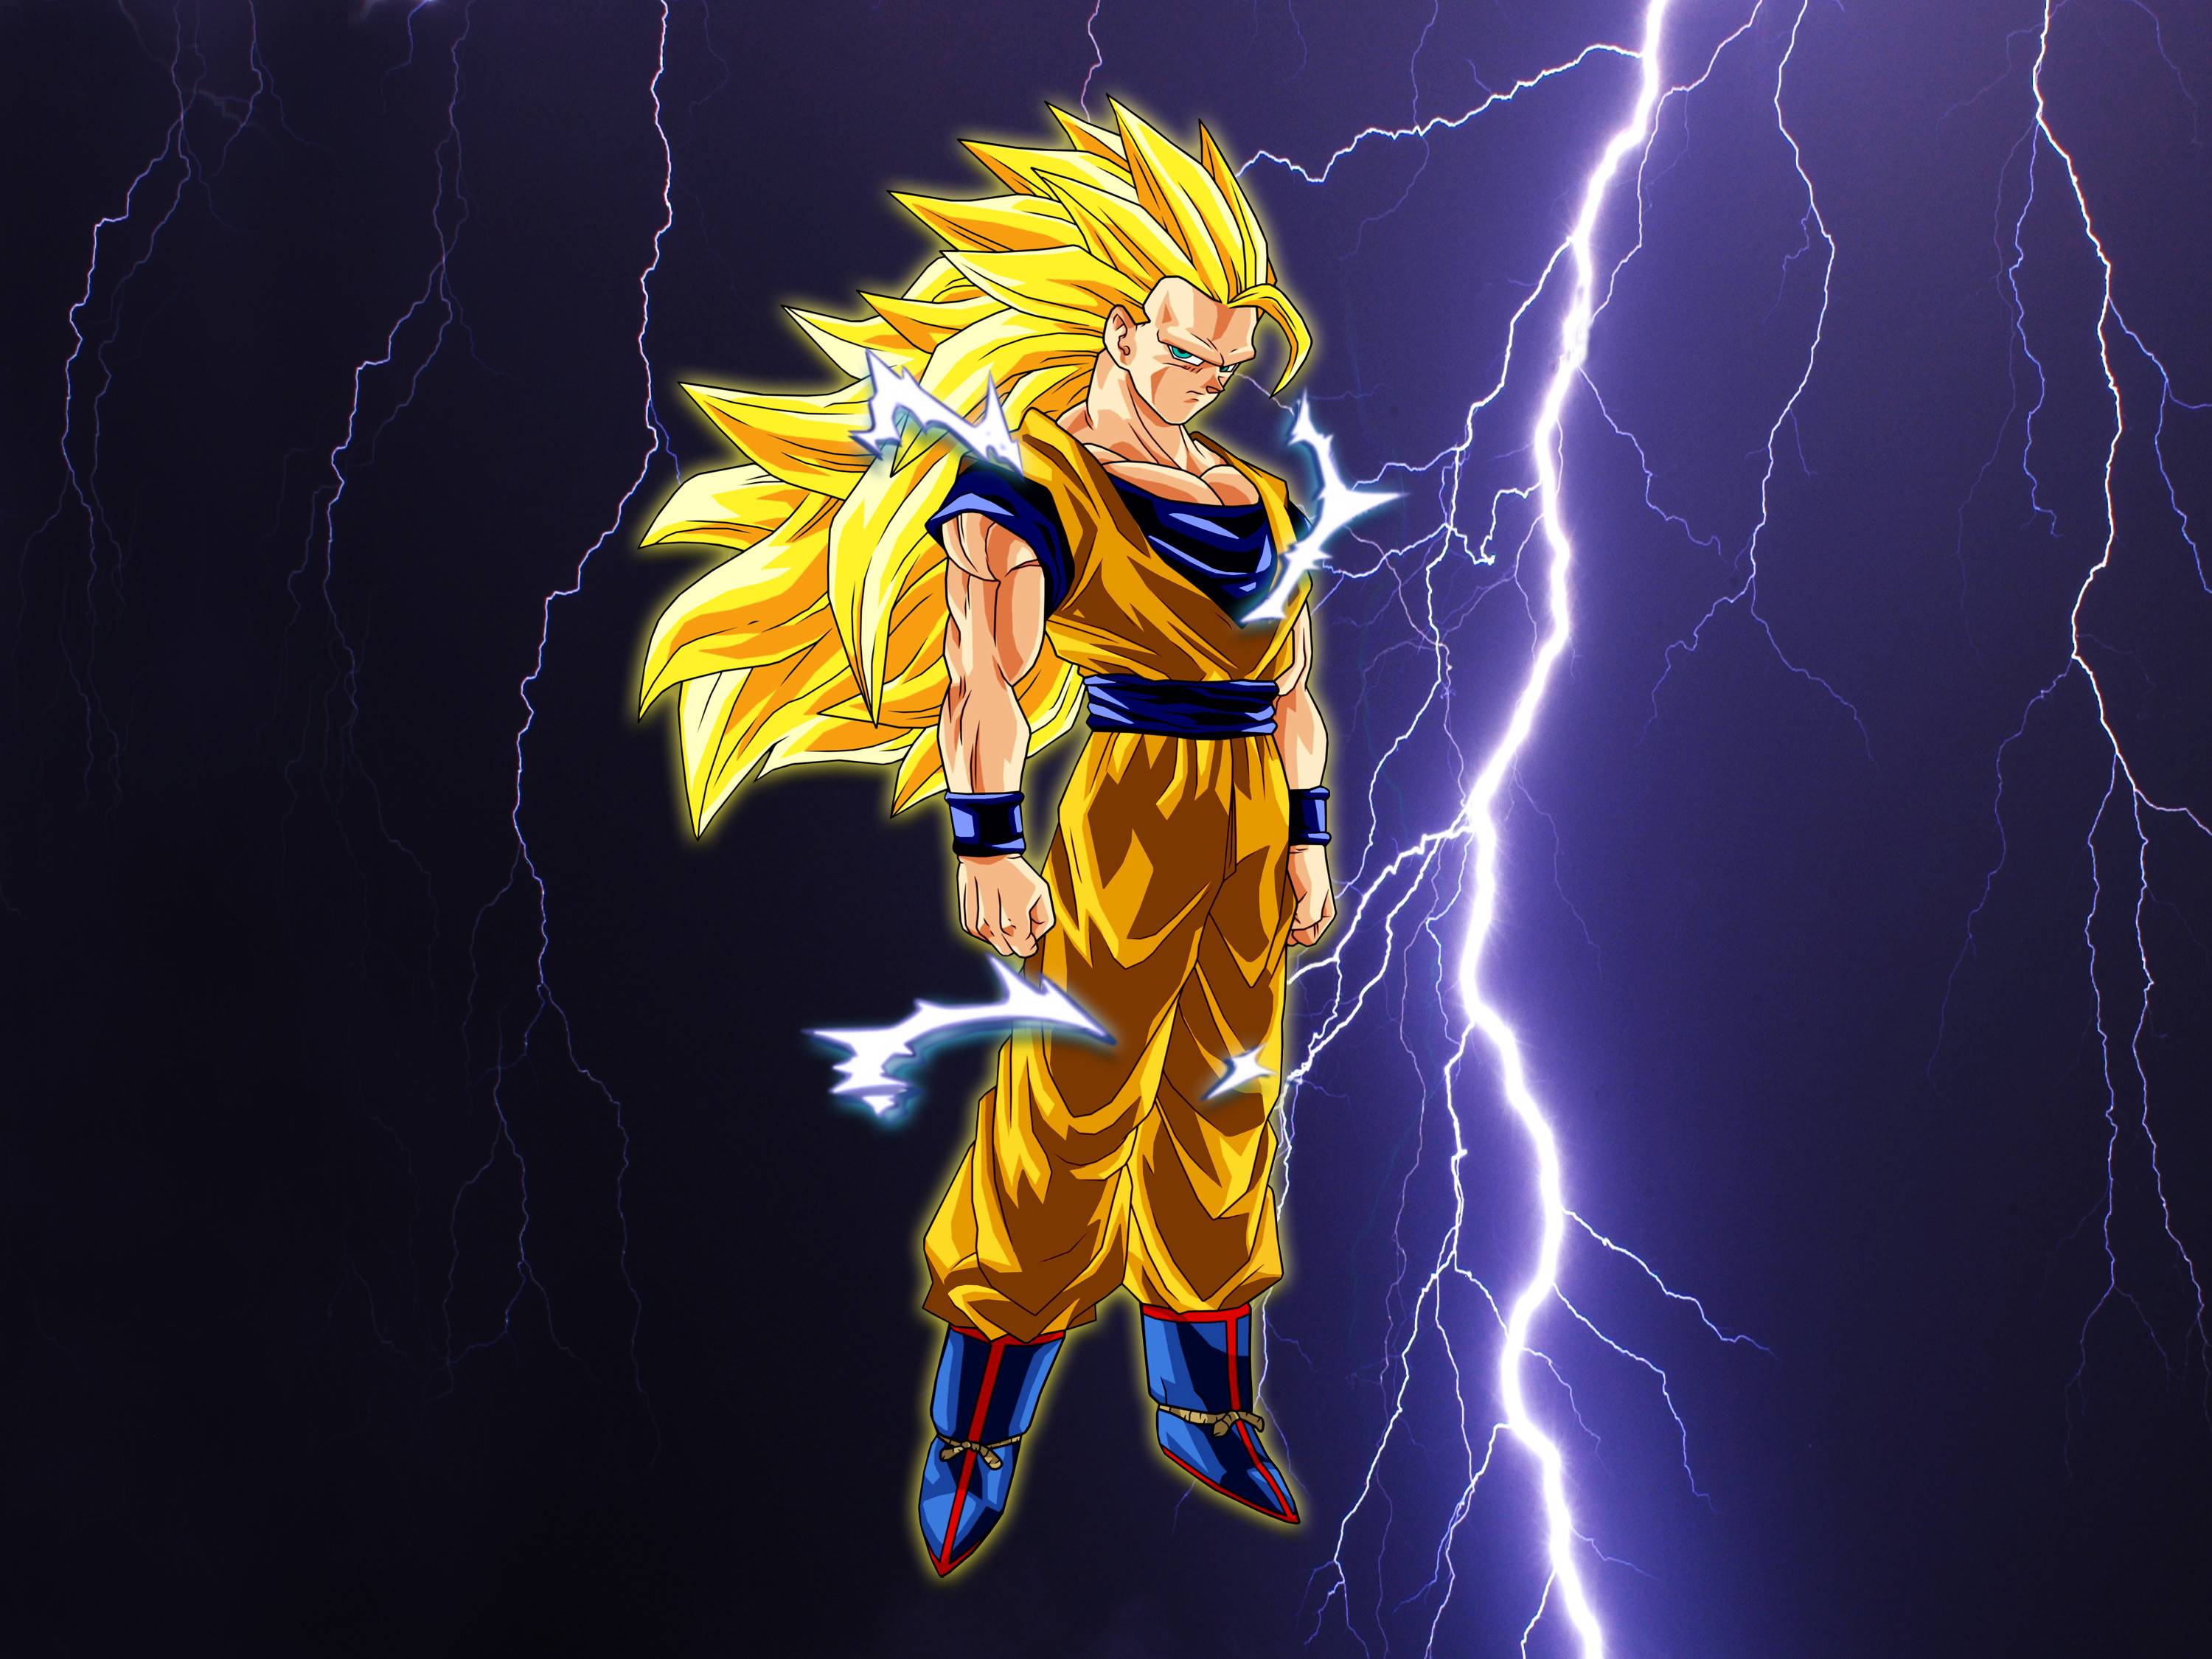 1280x2120 Battle Fire Super Saiyan 3 Goku Dragon Ball Z iPhone 6 HD 4k  Wallpapers Images Backgrounds Photos and Pictures